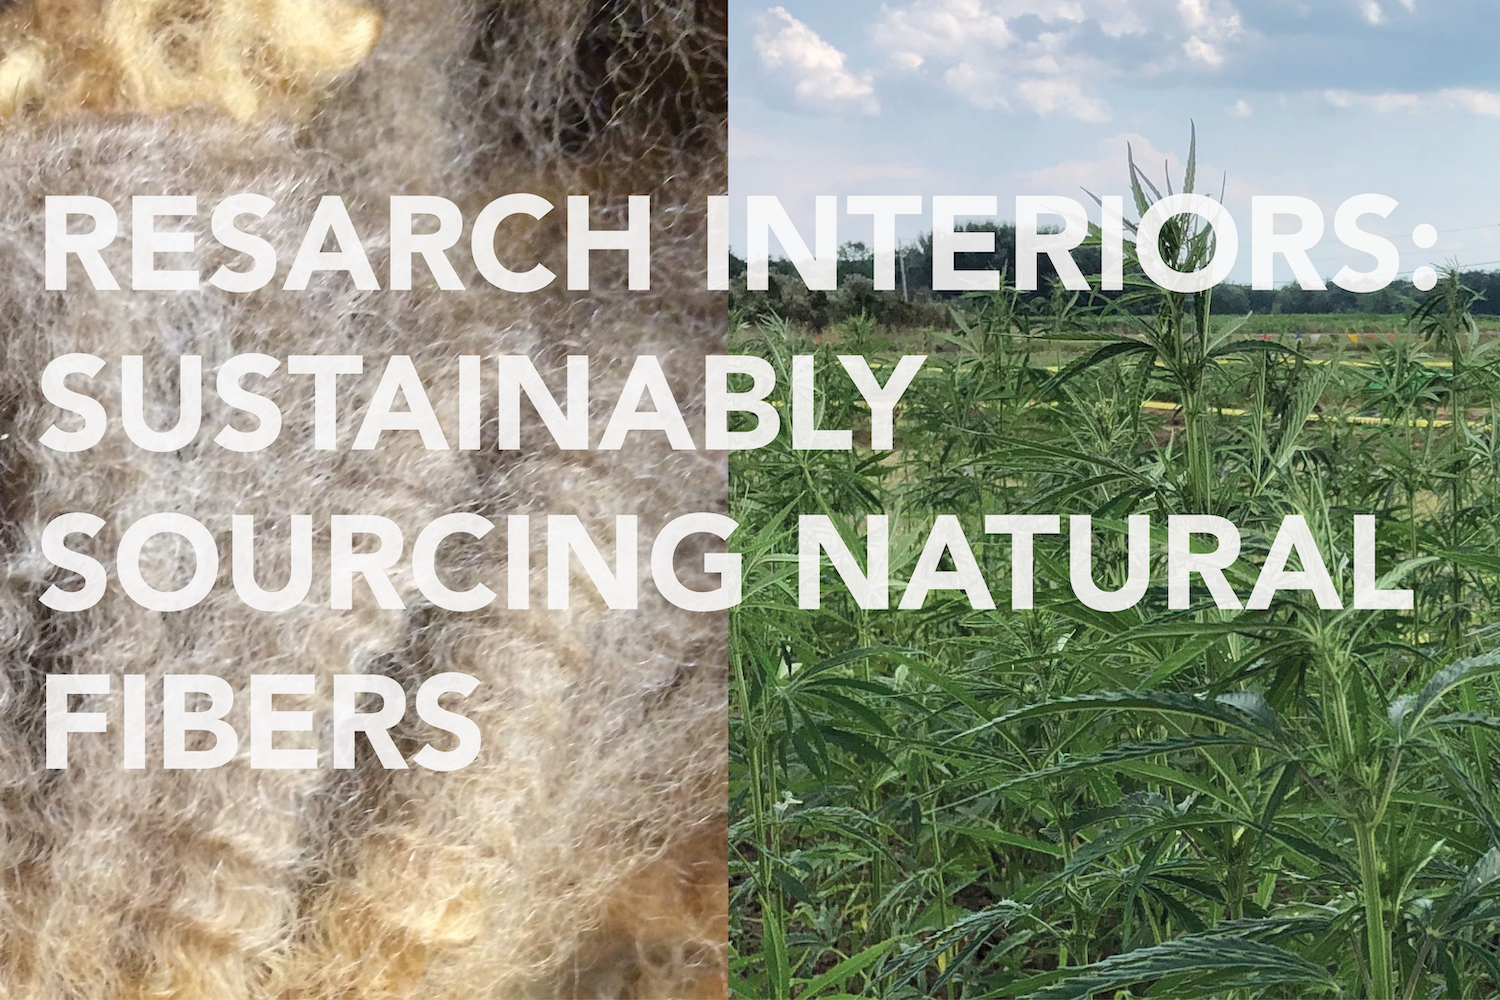 Research Interiors Sustainably Sourcing Natural Fibers 1500x1000 Final 22